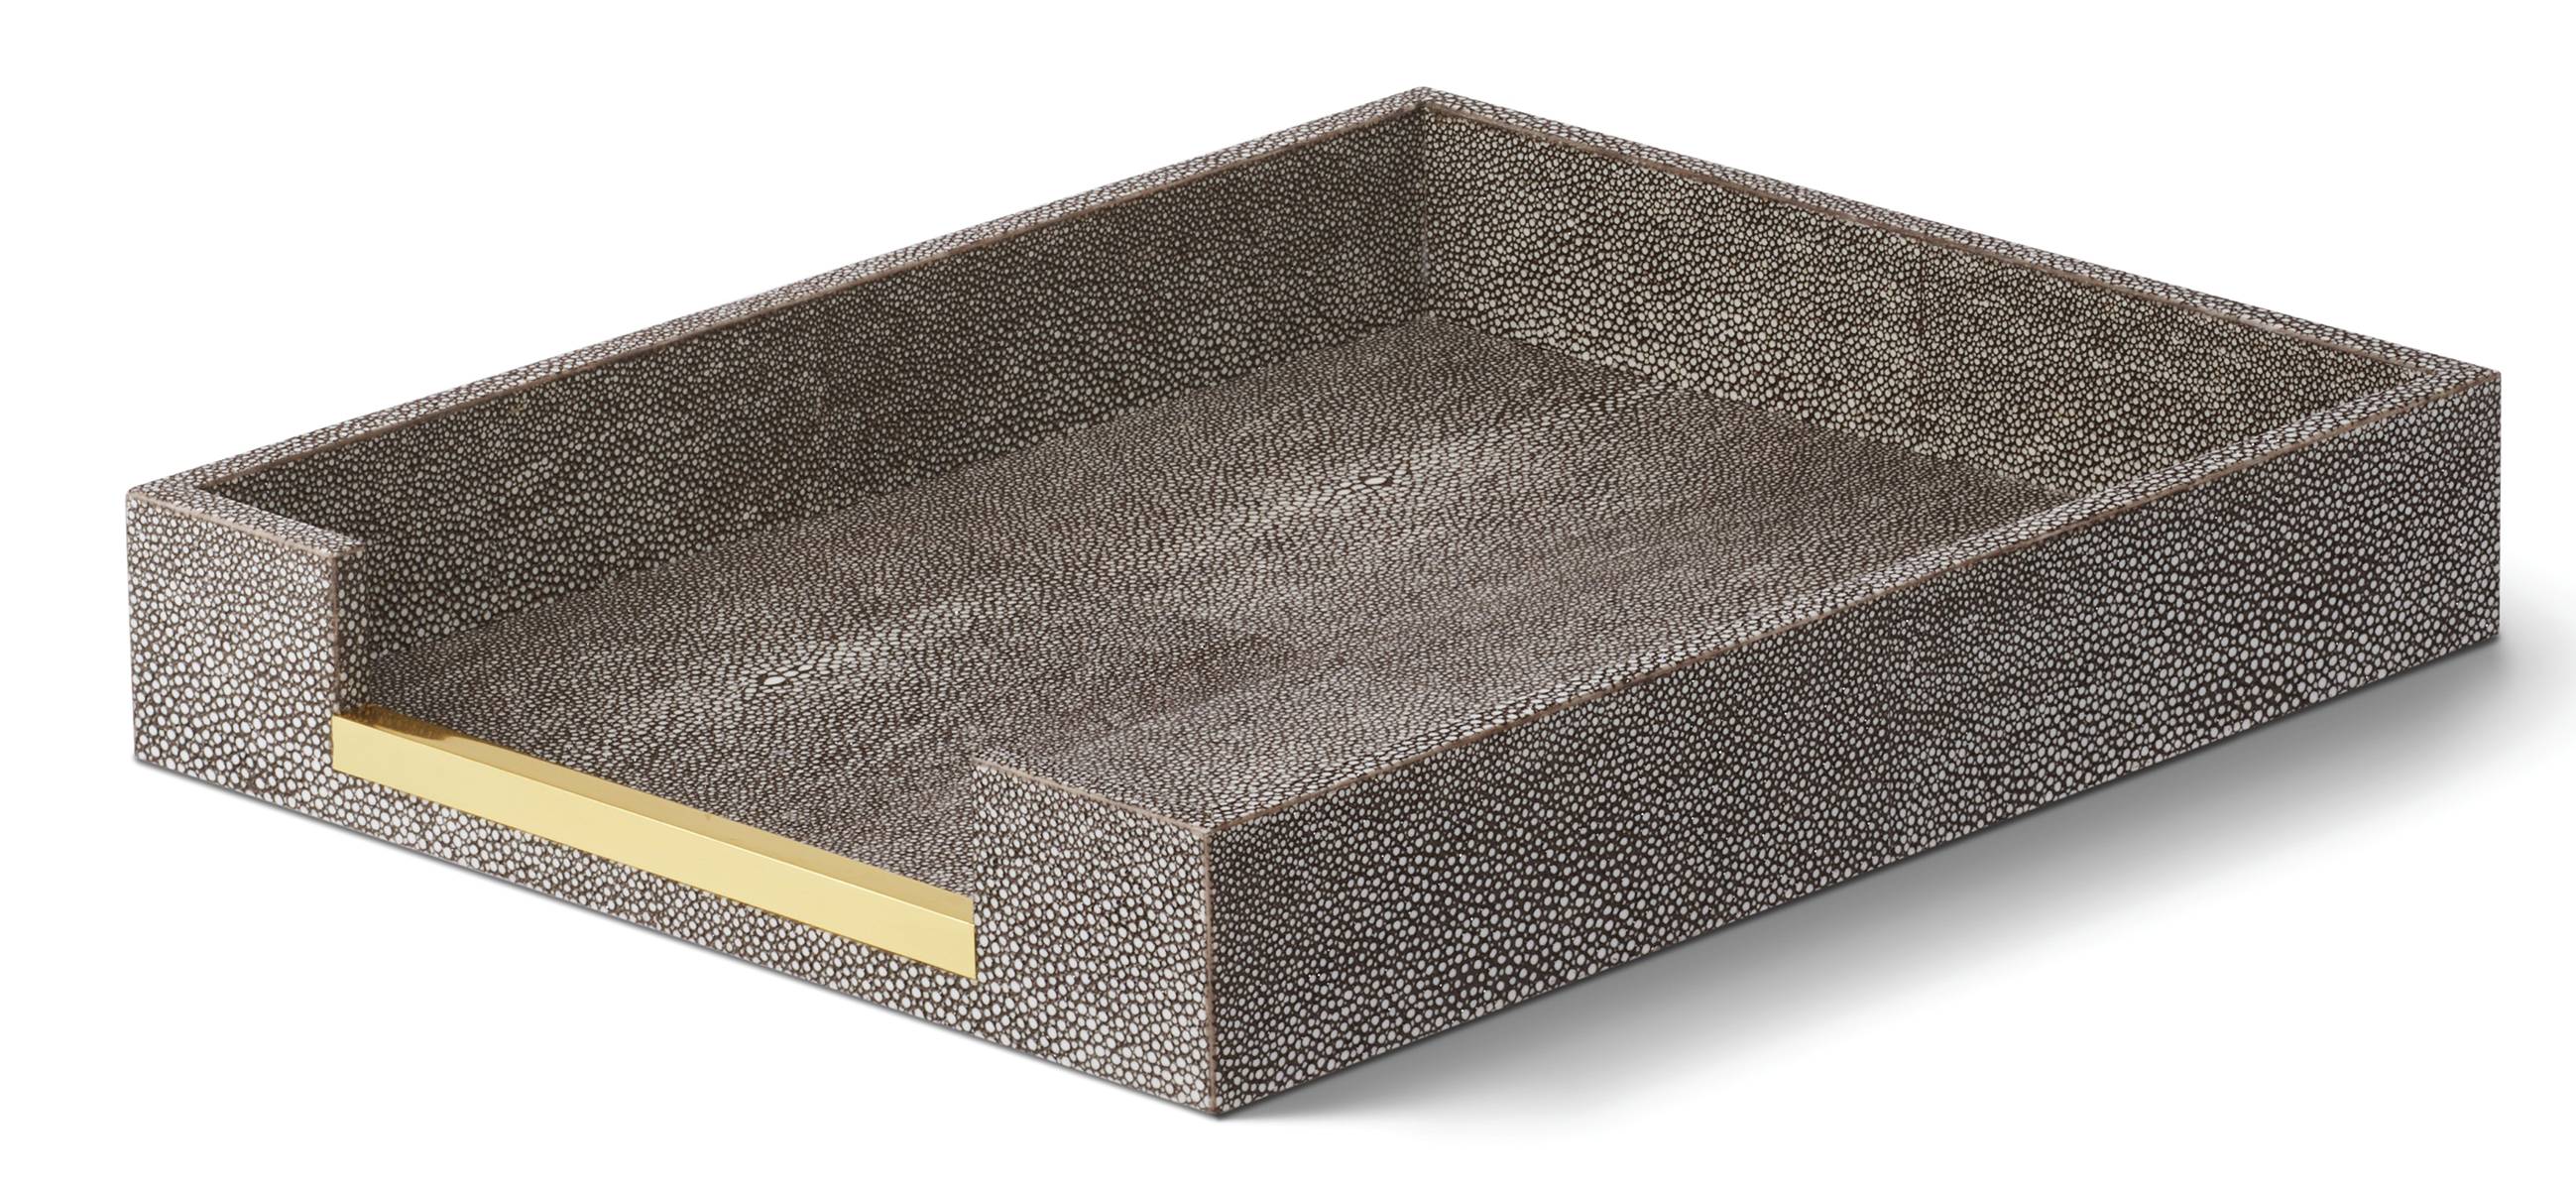 AERIN Shagreen paper tray in Chocolate